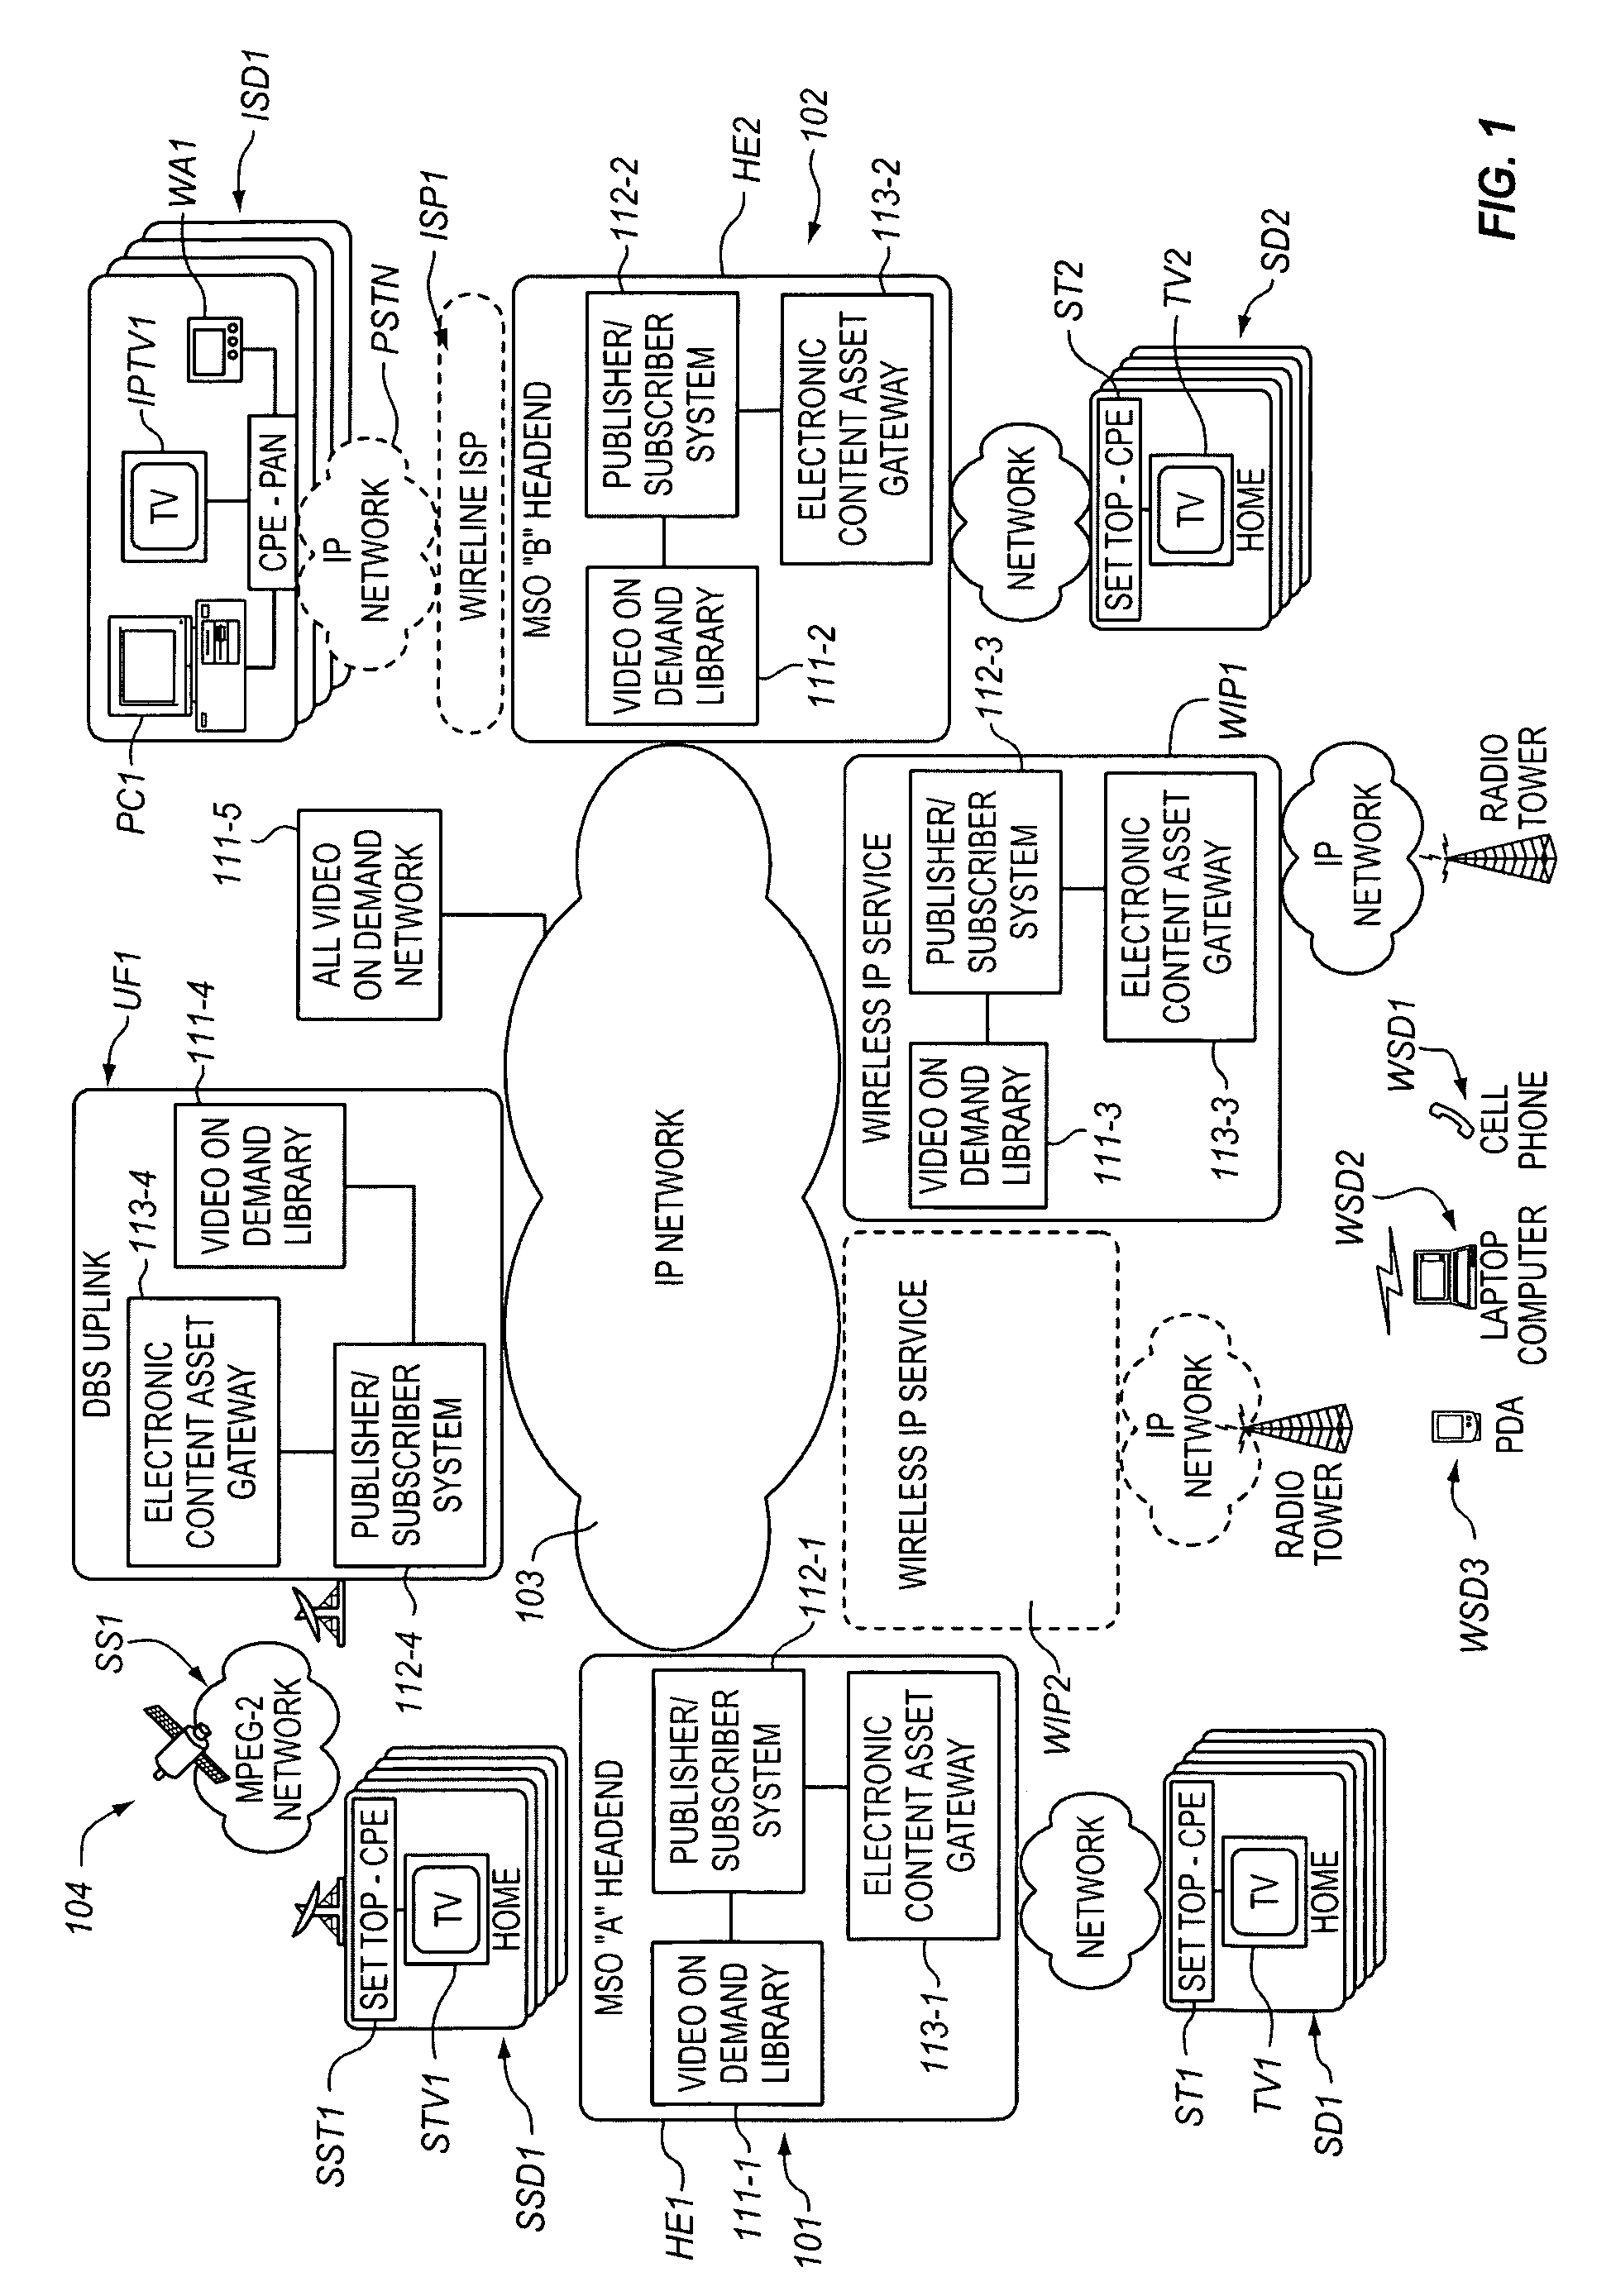 User interface architecture for an electronic content asset publication system